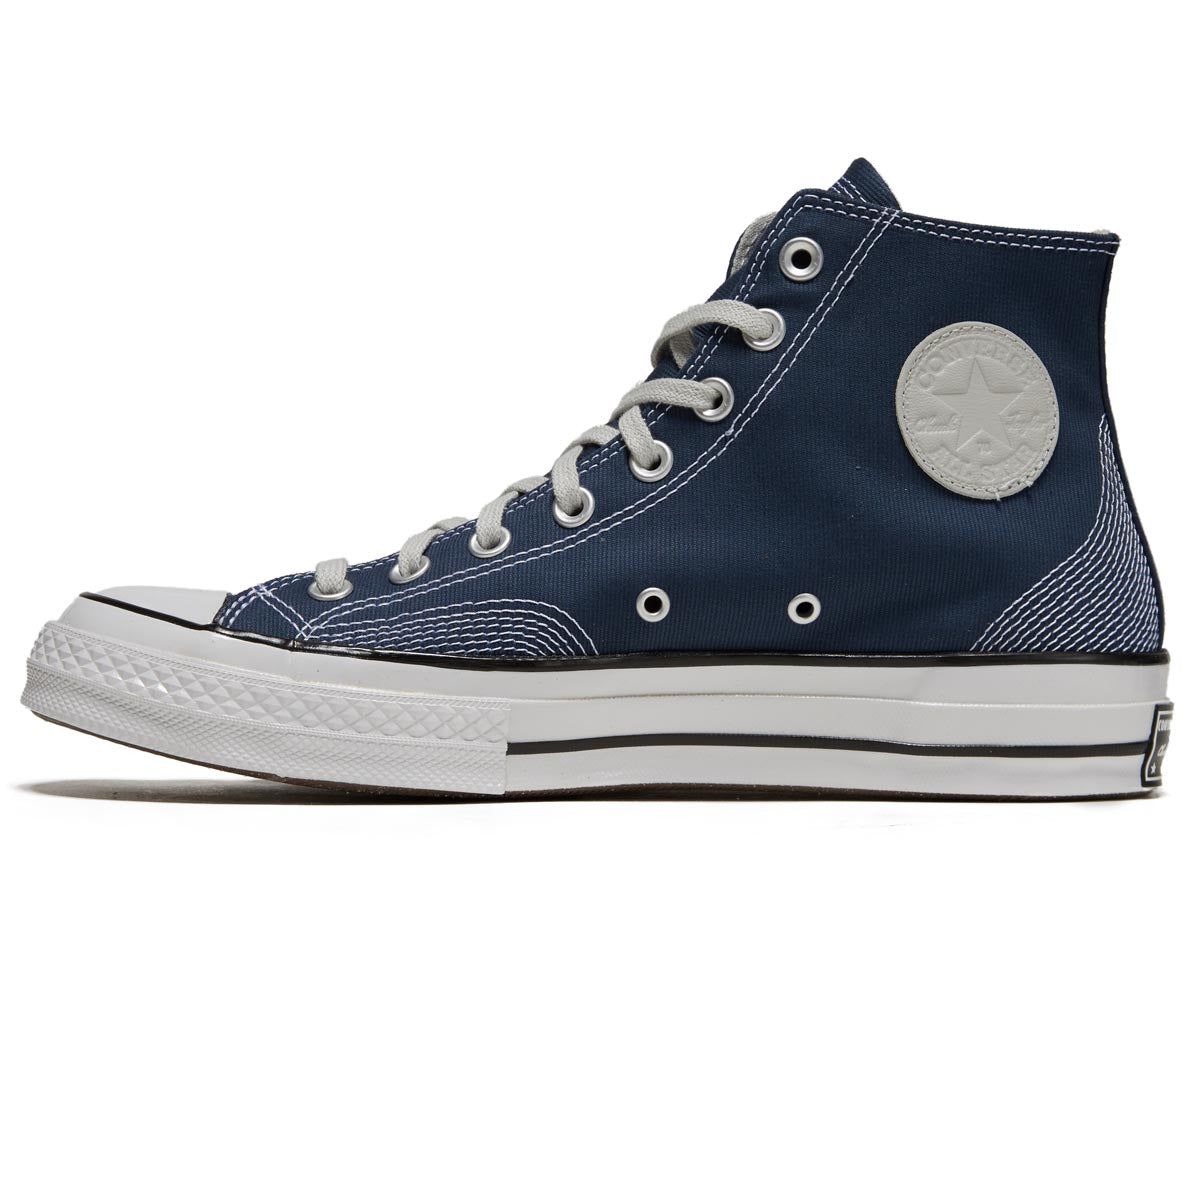 Converse Chuck 70 Hi Shoes - Navy/Fossilized/Fossilized image 2